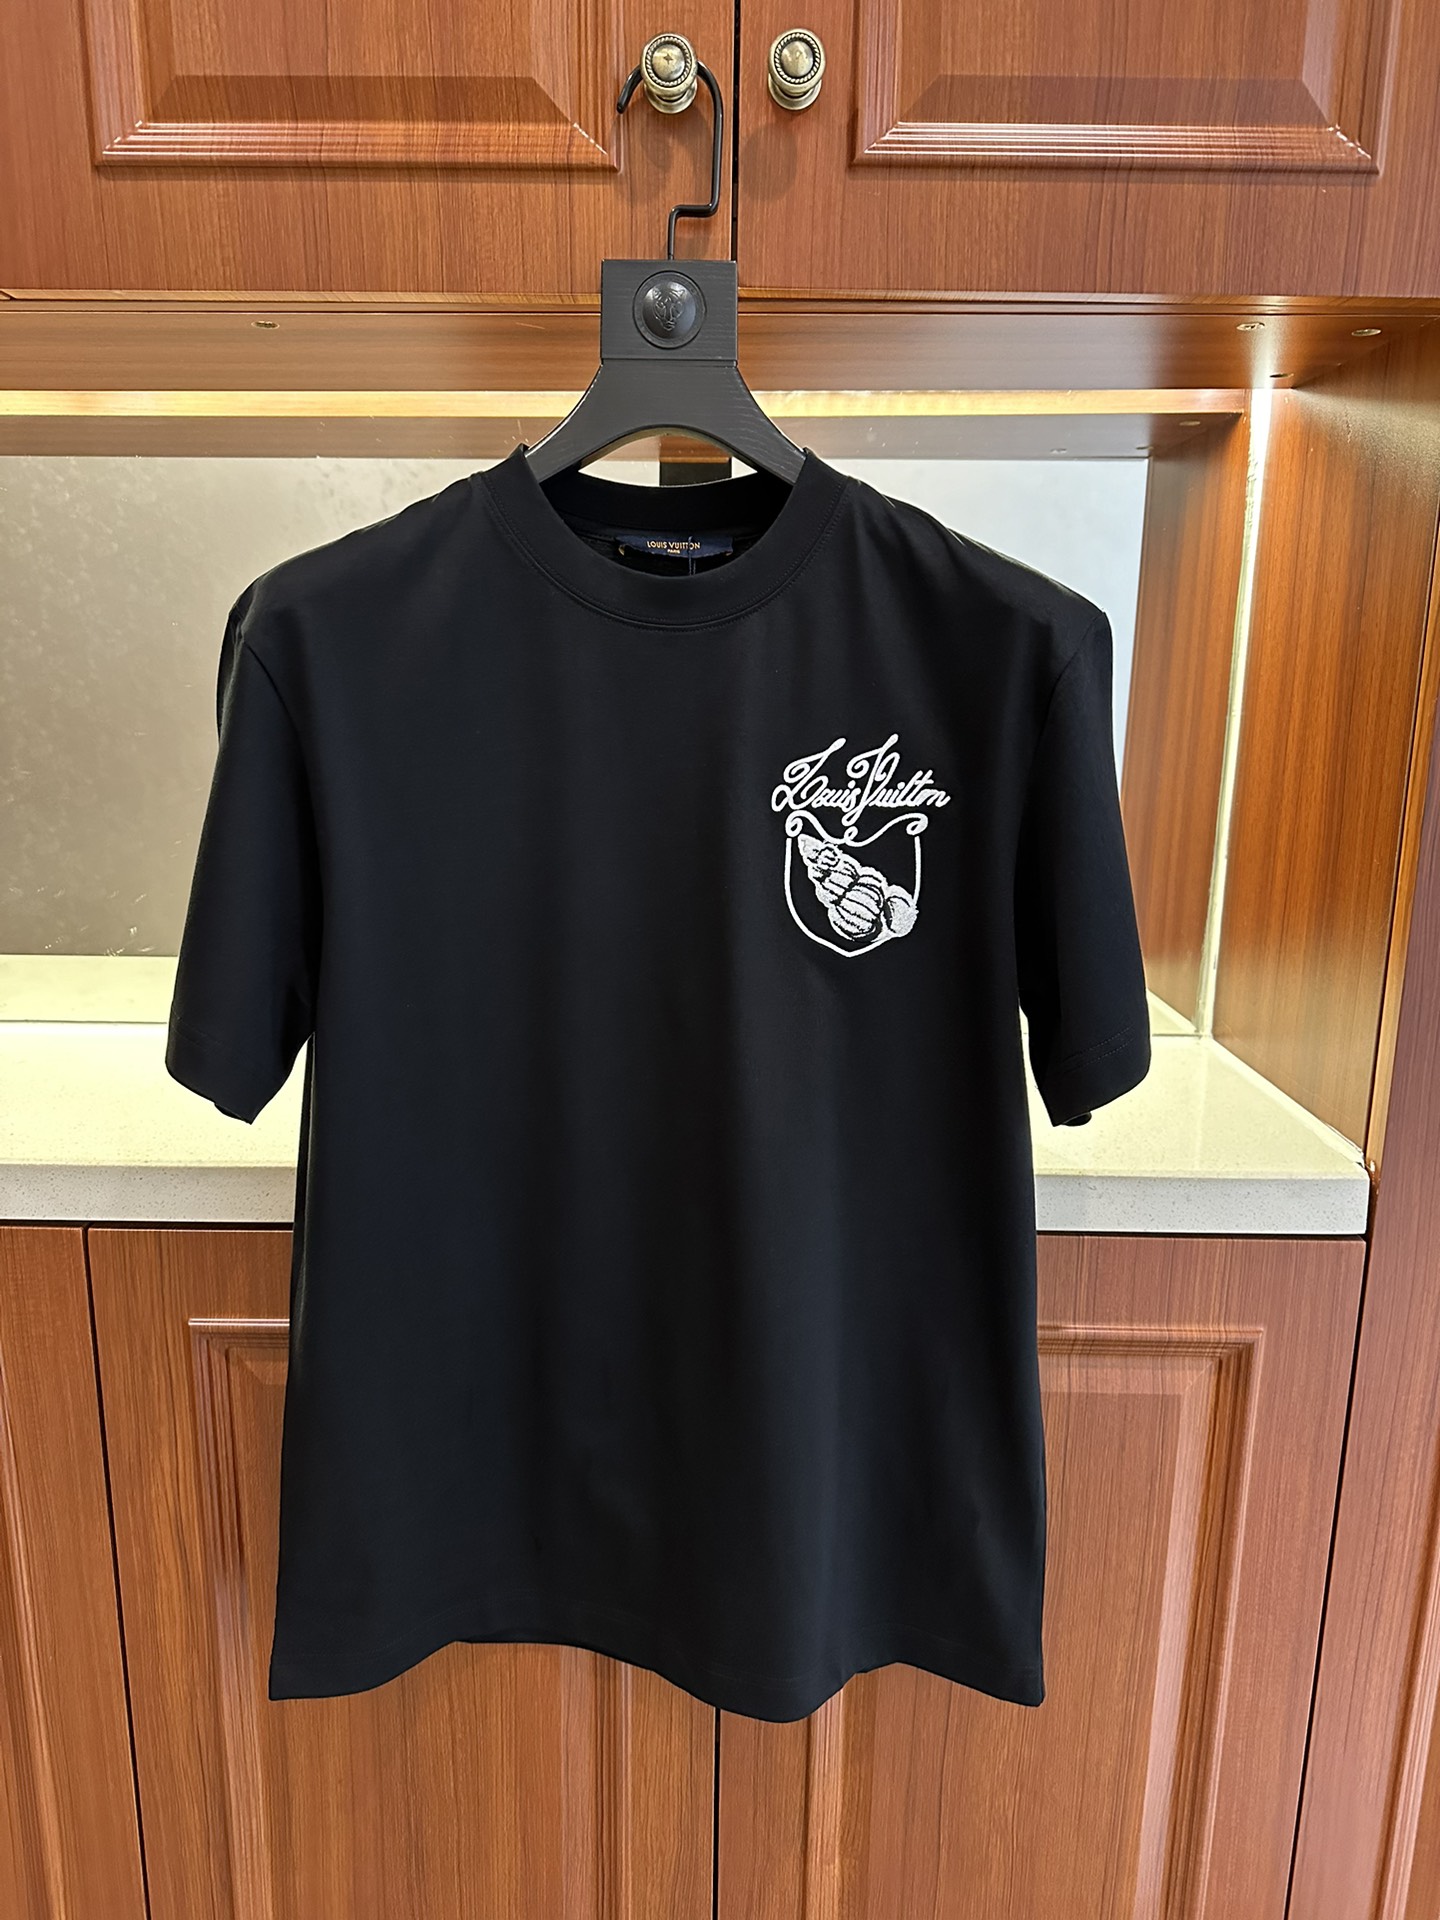 Louis Vuitton Clothing T-Shirt Black White Embroidery Cotton Spring/Summer Collection Fashion Short Sleeve